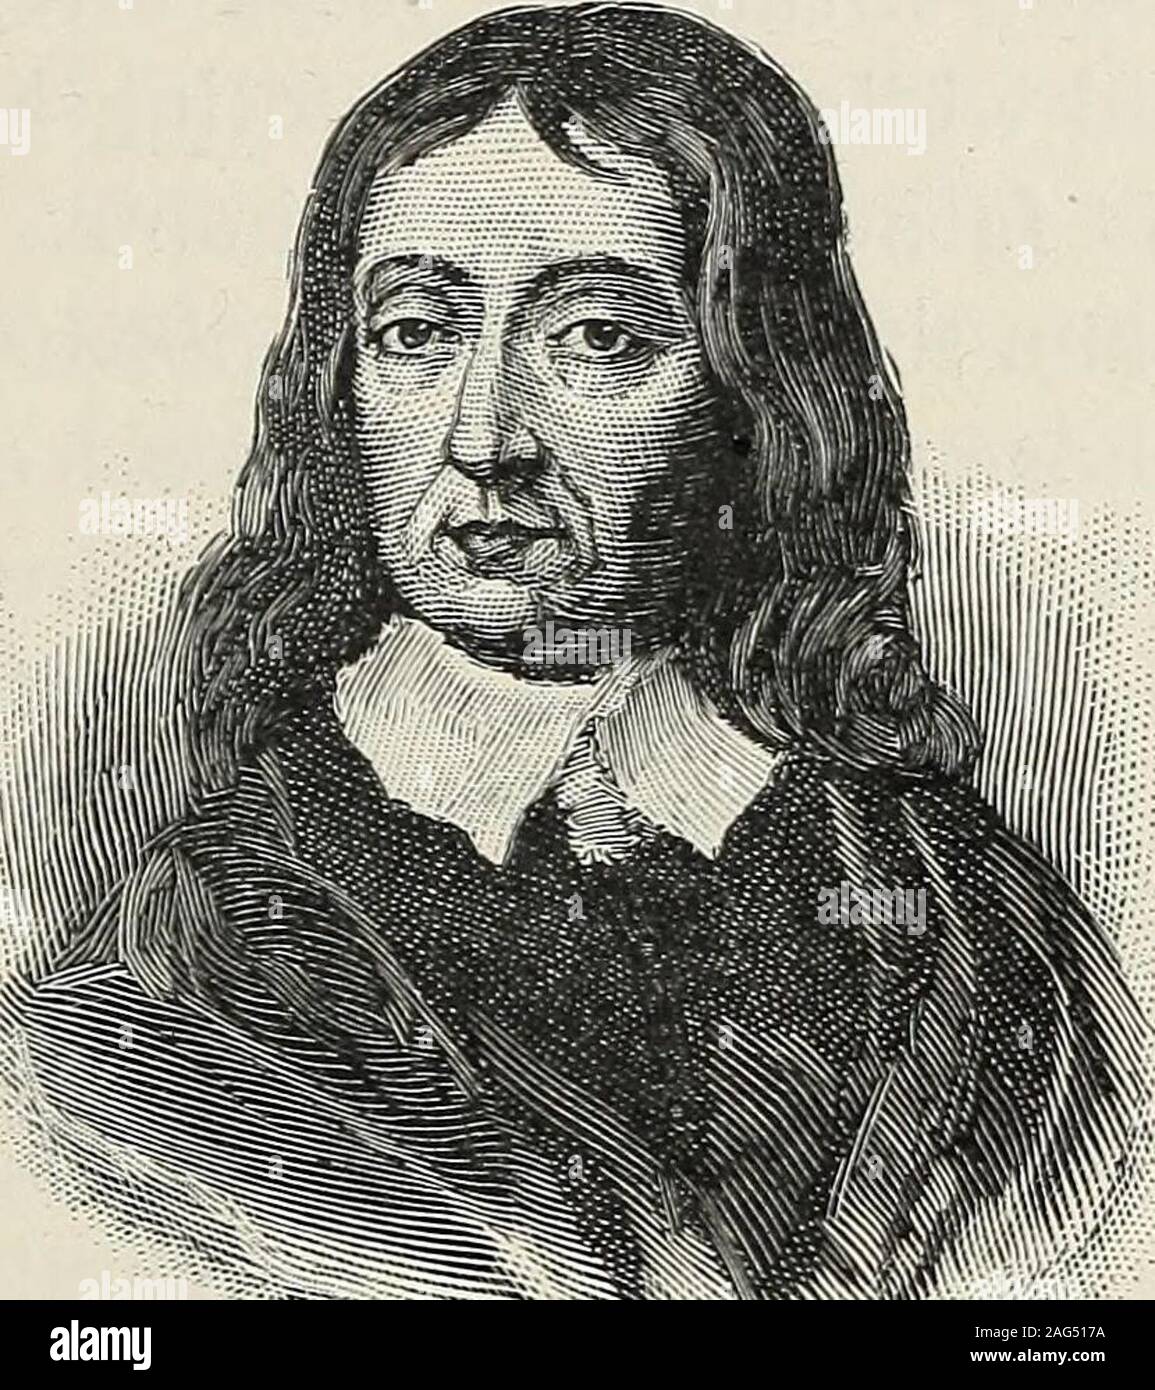 . A short history of England's and America's literature, by Eva March Tappan. ces, that of Donnewas by far the strongest. 70. John Milton, 1608-1674. Of the poets whowrote between 1625 and 1660, John Milton stands forthe poetry of medita-tion. He was born in1608, the son of awealthy Londoner. Thefather was anxious thathis son should devotehimself to literature;and when he saw howperfectly the boyswishes harmonized withhis own, he left him ab-solutely free to followhis own will. Less free-dom in some respects J°HN miltonmight have been bet- 160 1674ter; for this boy of twelve with weak eyes and Stock Photo